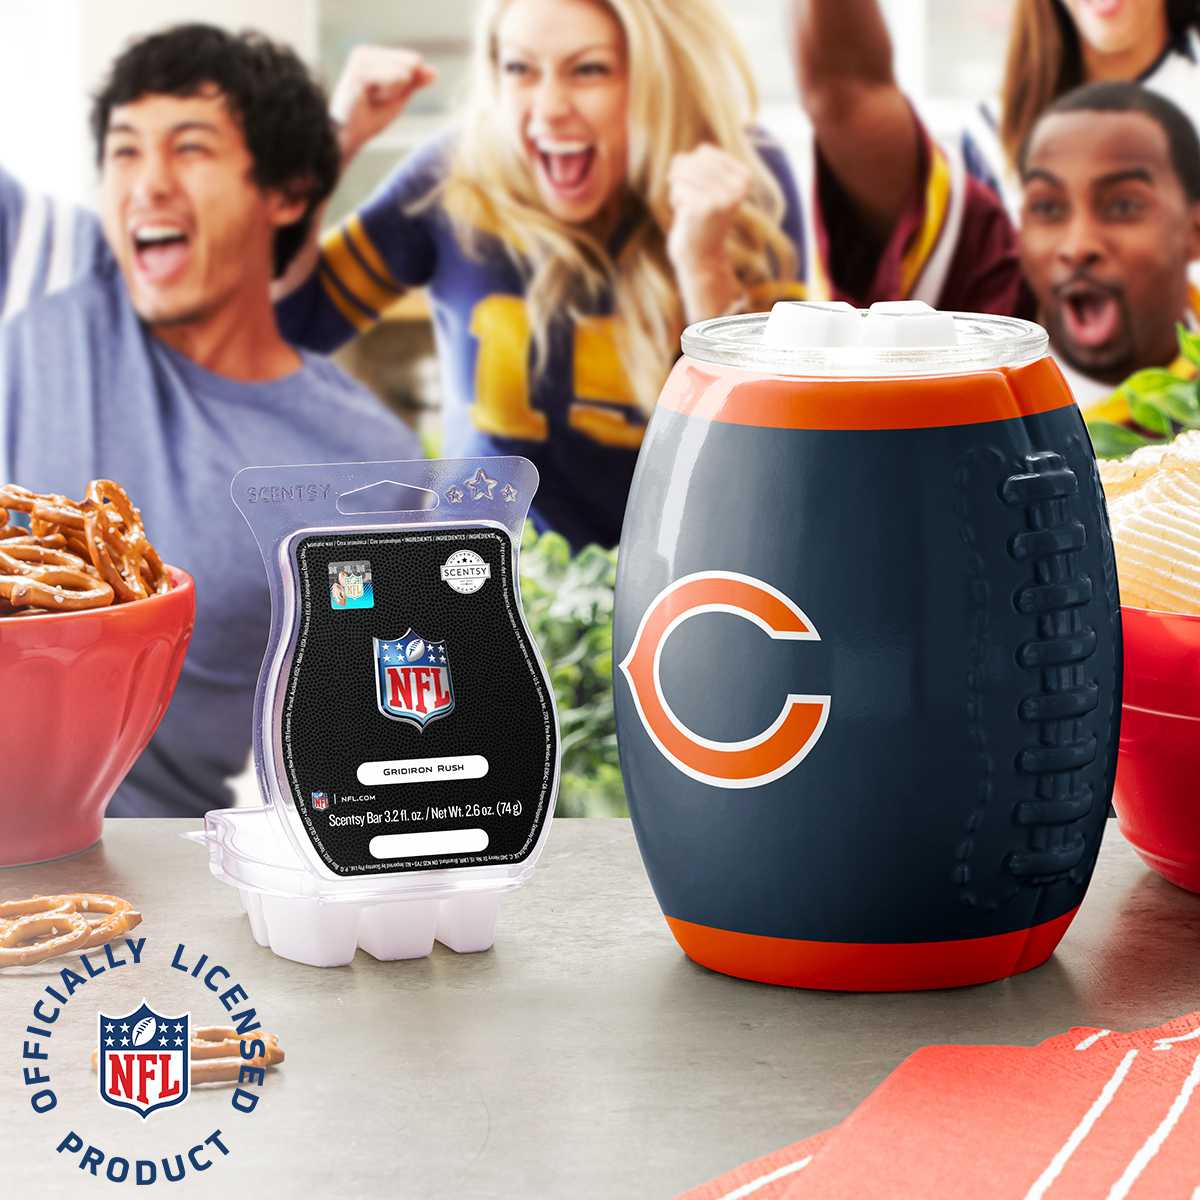 Chicago Bears NFL Scentsy Warmer